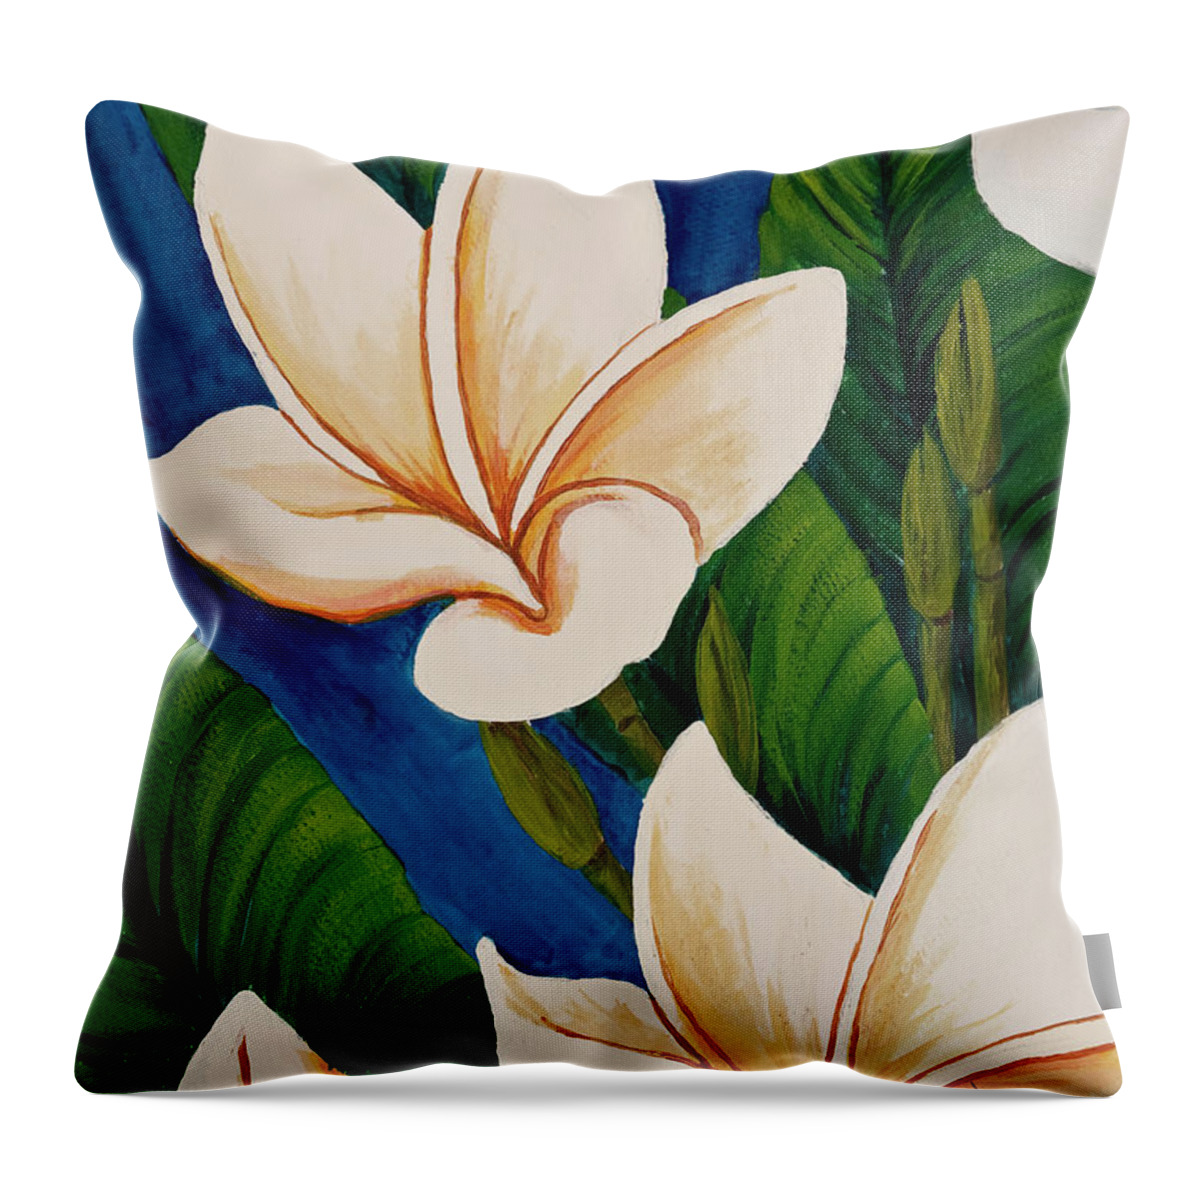 Tropical Flower Throw Pillow featuring the painting Plumeria by Darice Machel McGuire